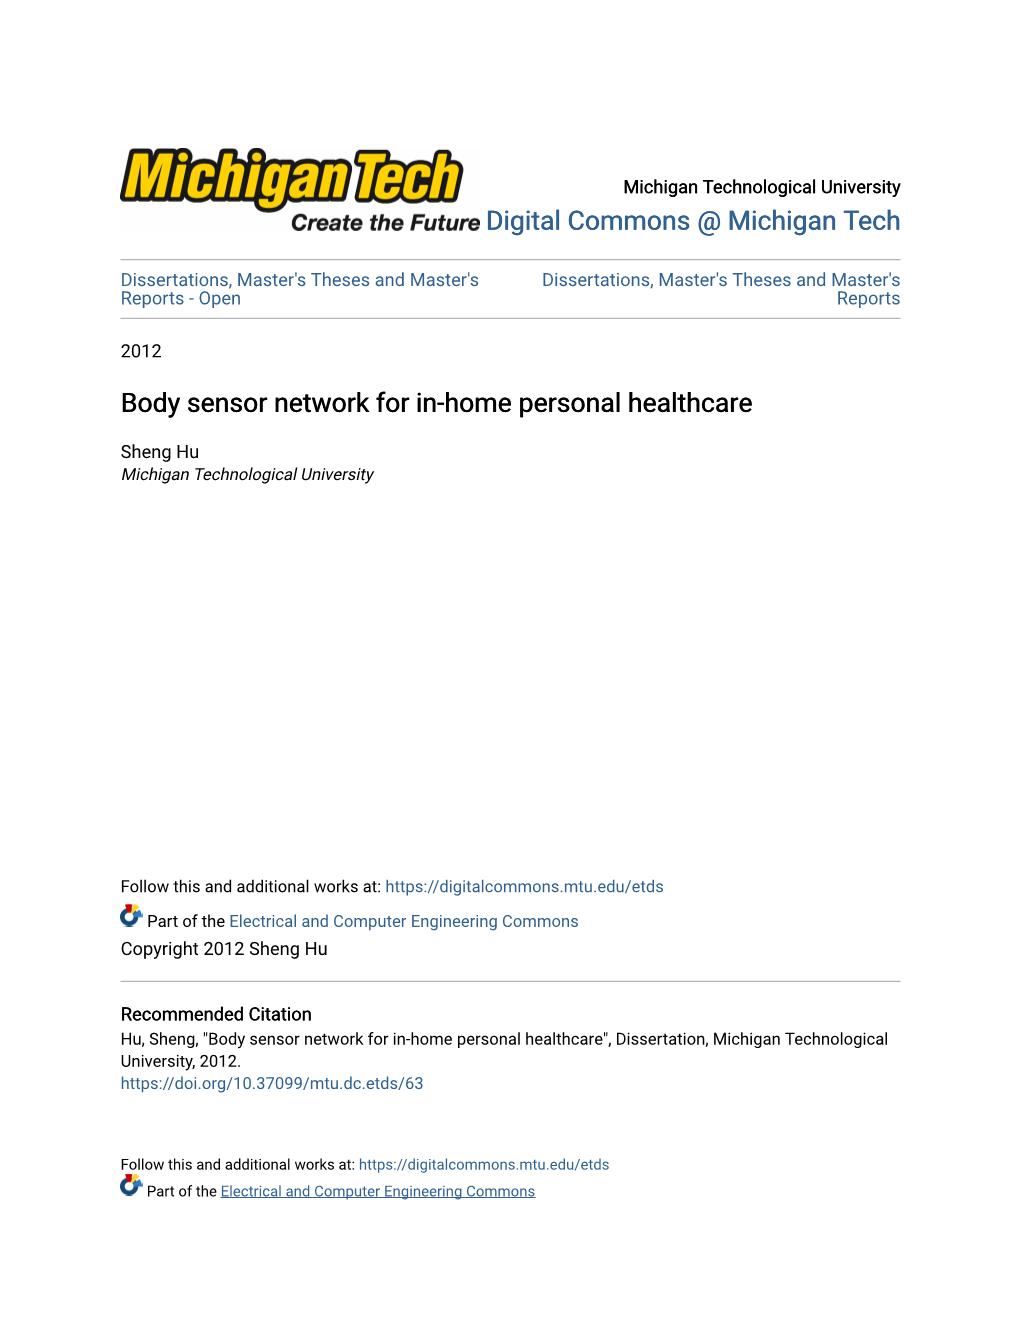 Body Sensor Network for In-Home Personal Healthcare